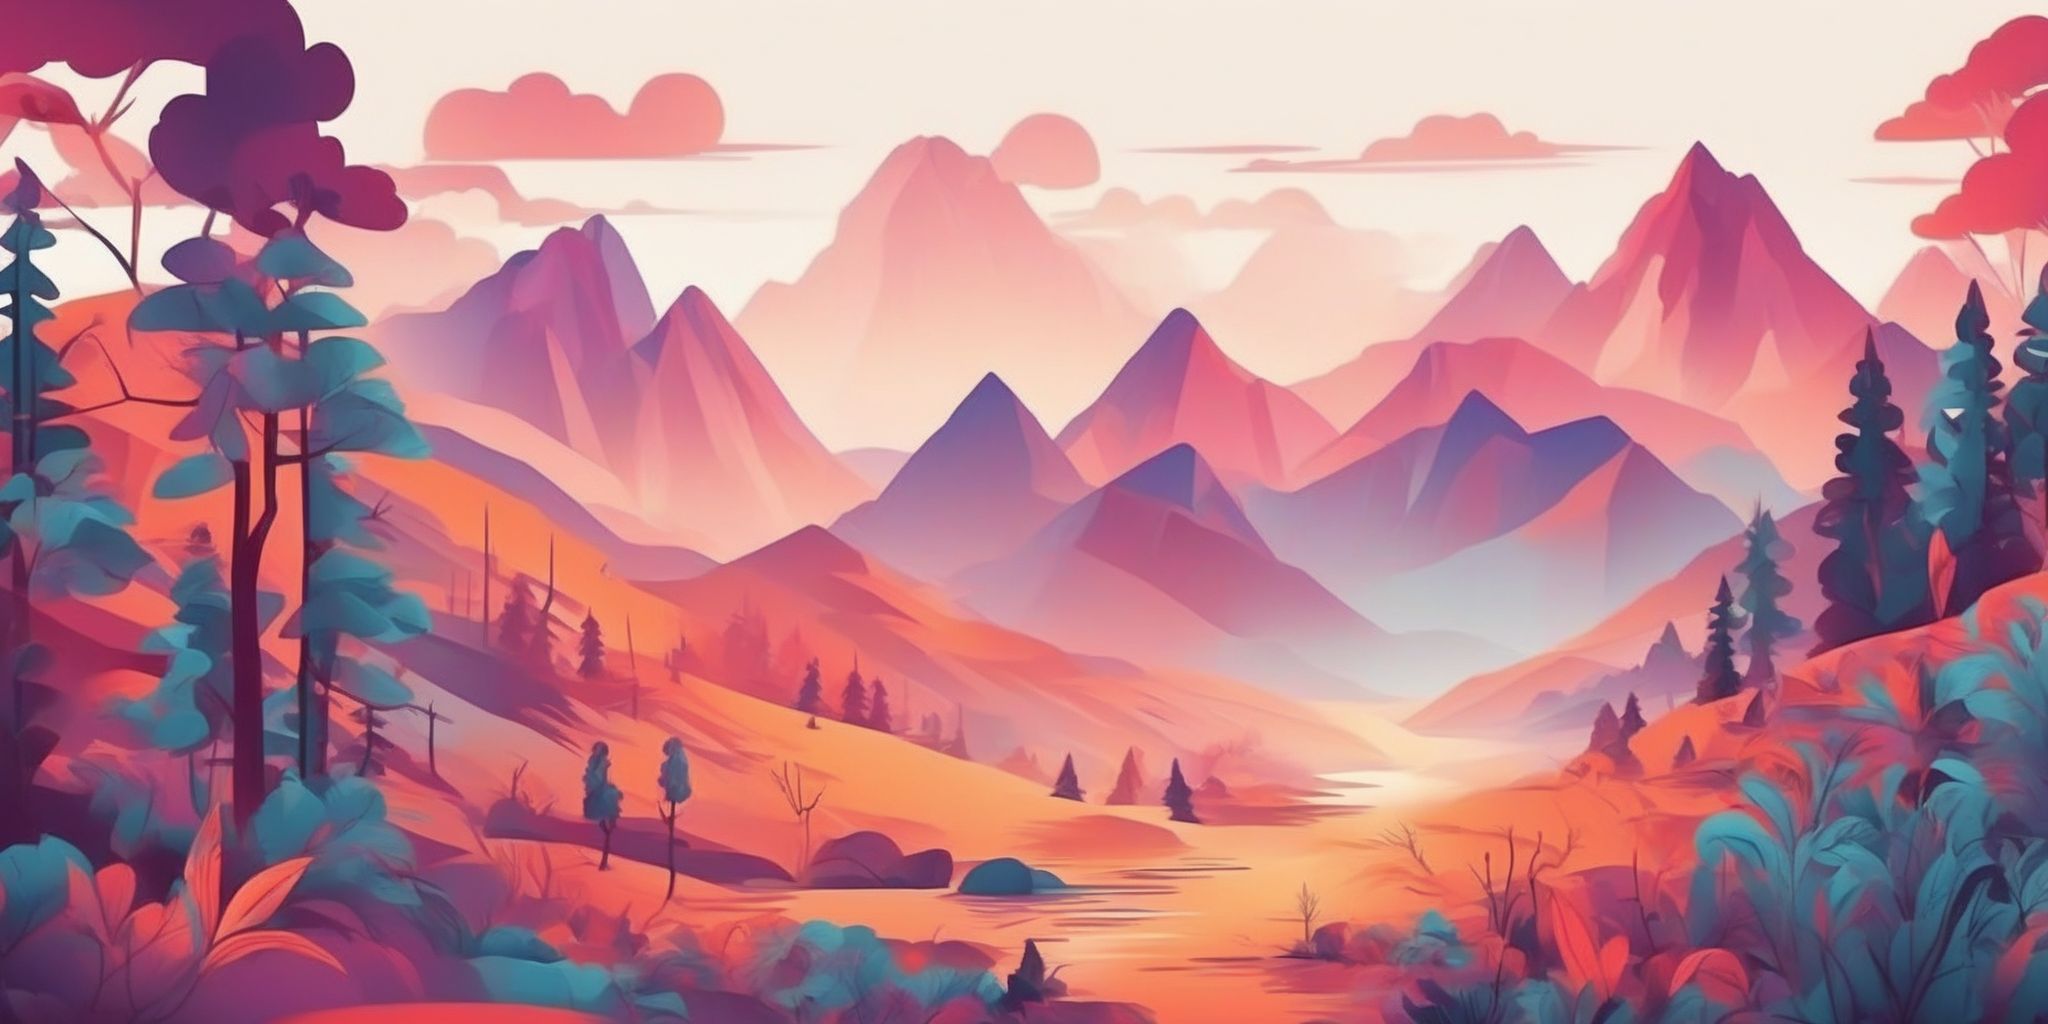 Explore in illustration style with gradients and white background